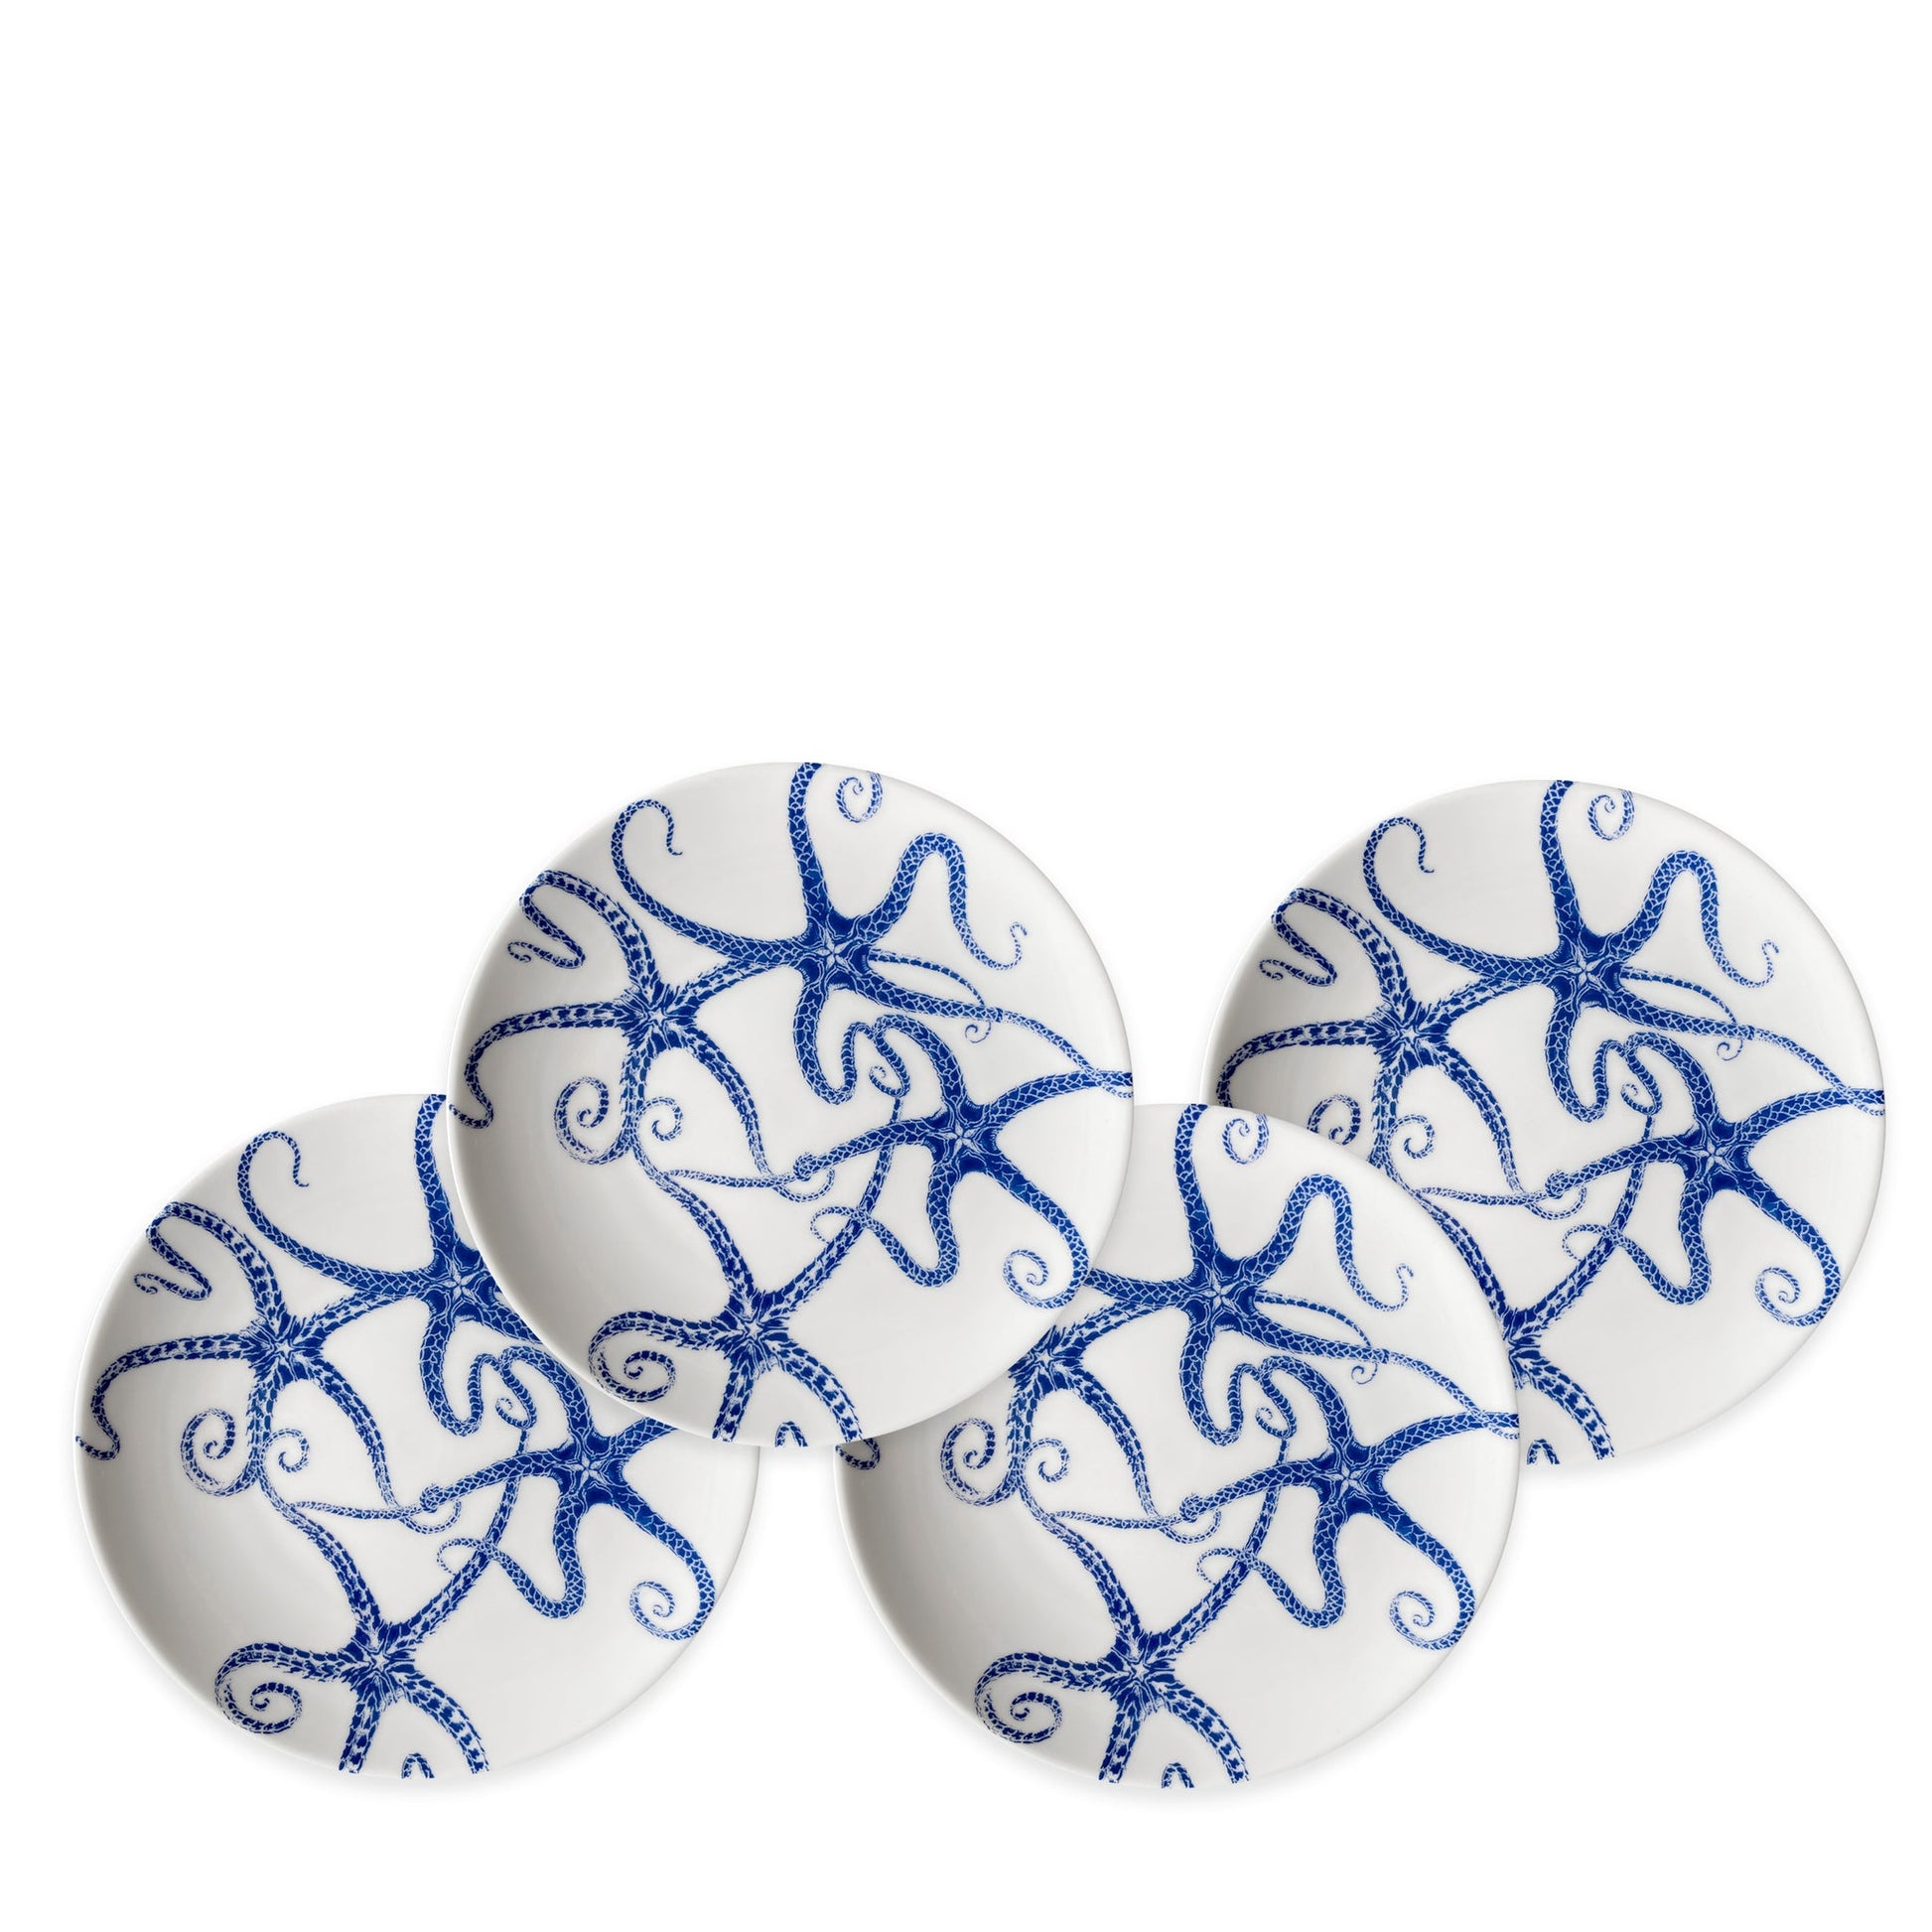 Starfish Appetizer Plates - Set of 4-Nautical Decor and Gifts